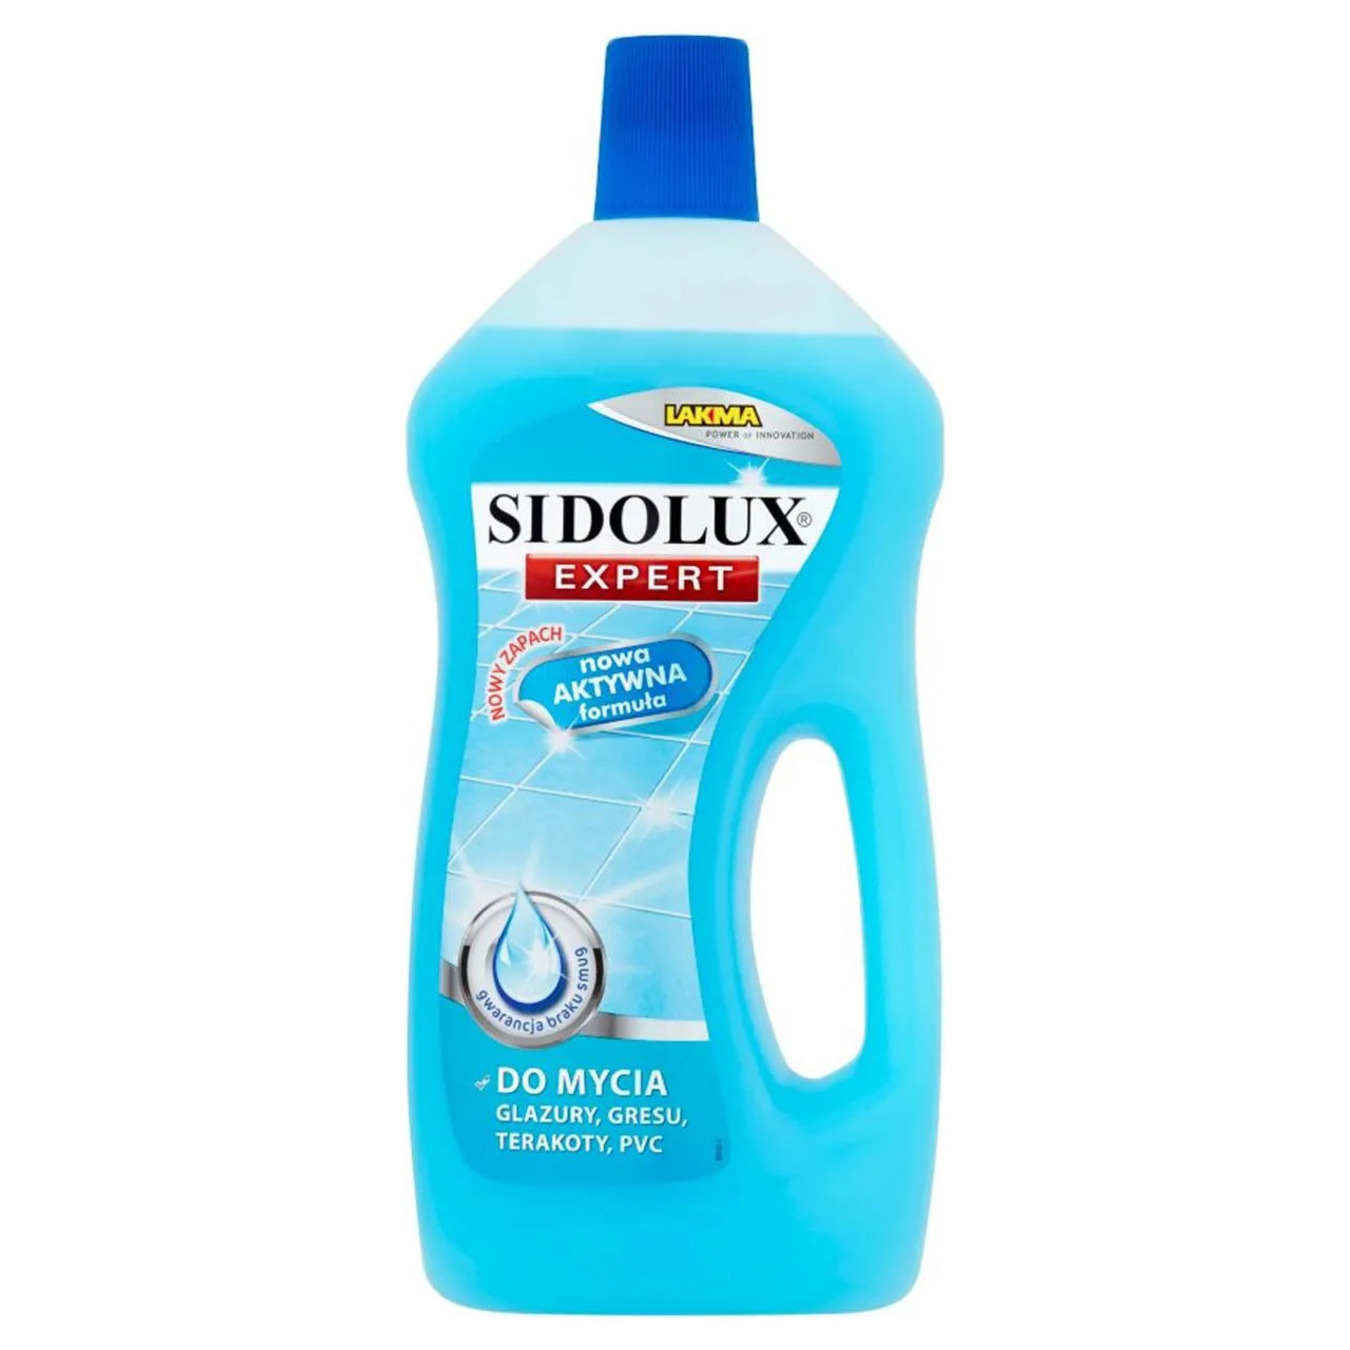 Sidolux Expert product for cleaning floors, linoleum, stone, tiles, 750 ml